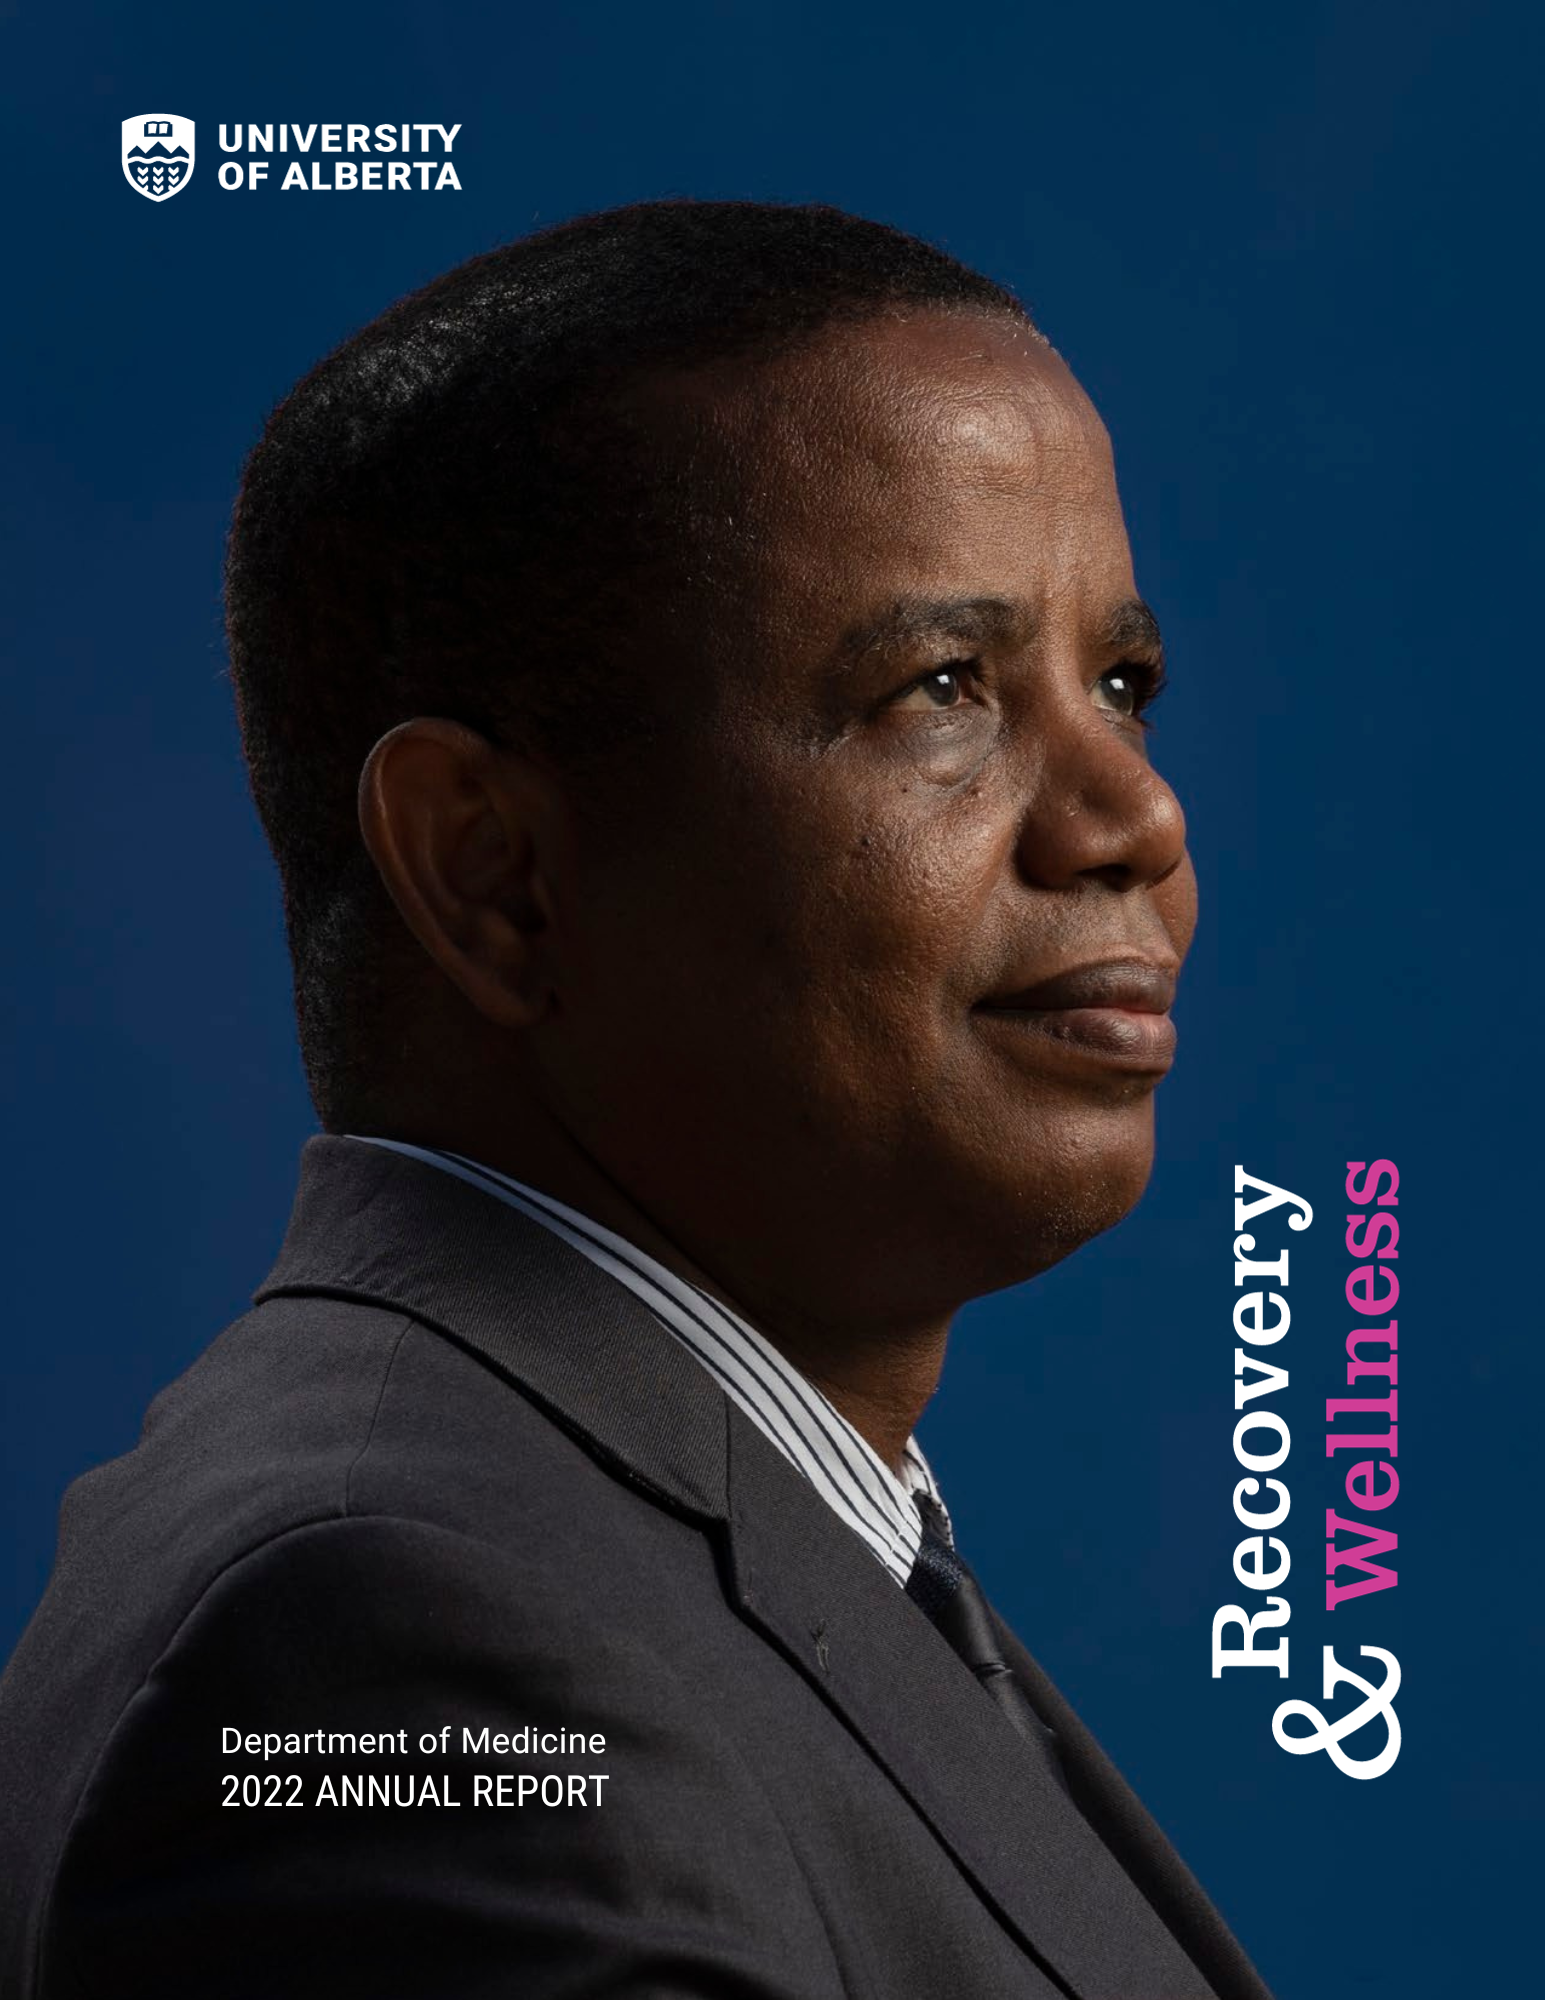 Cover of the 2022 Annual Report featuring Dr. Aminu Bello